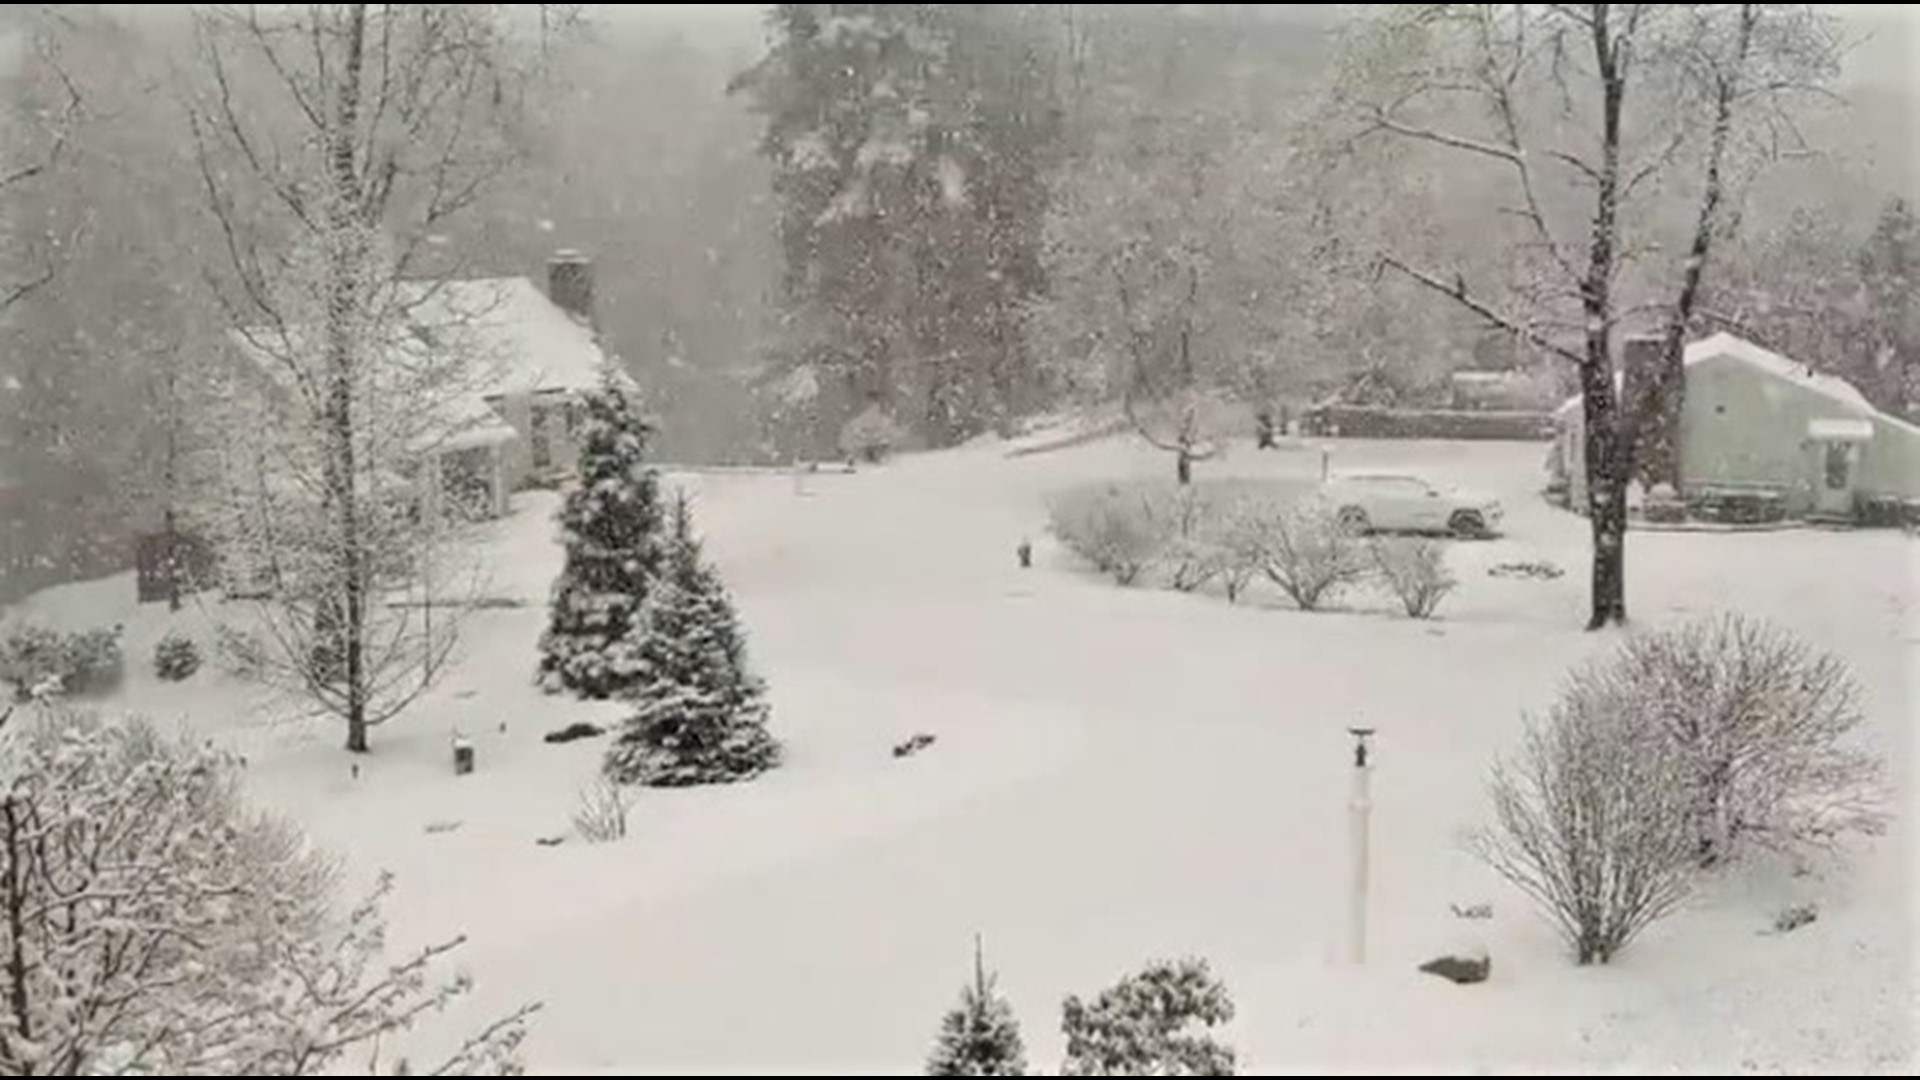 Residents across New England, including Connecticut, Massachusetts and New Hampshire, awoke to a spring winter wonderland on April 16.